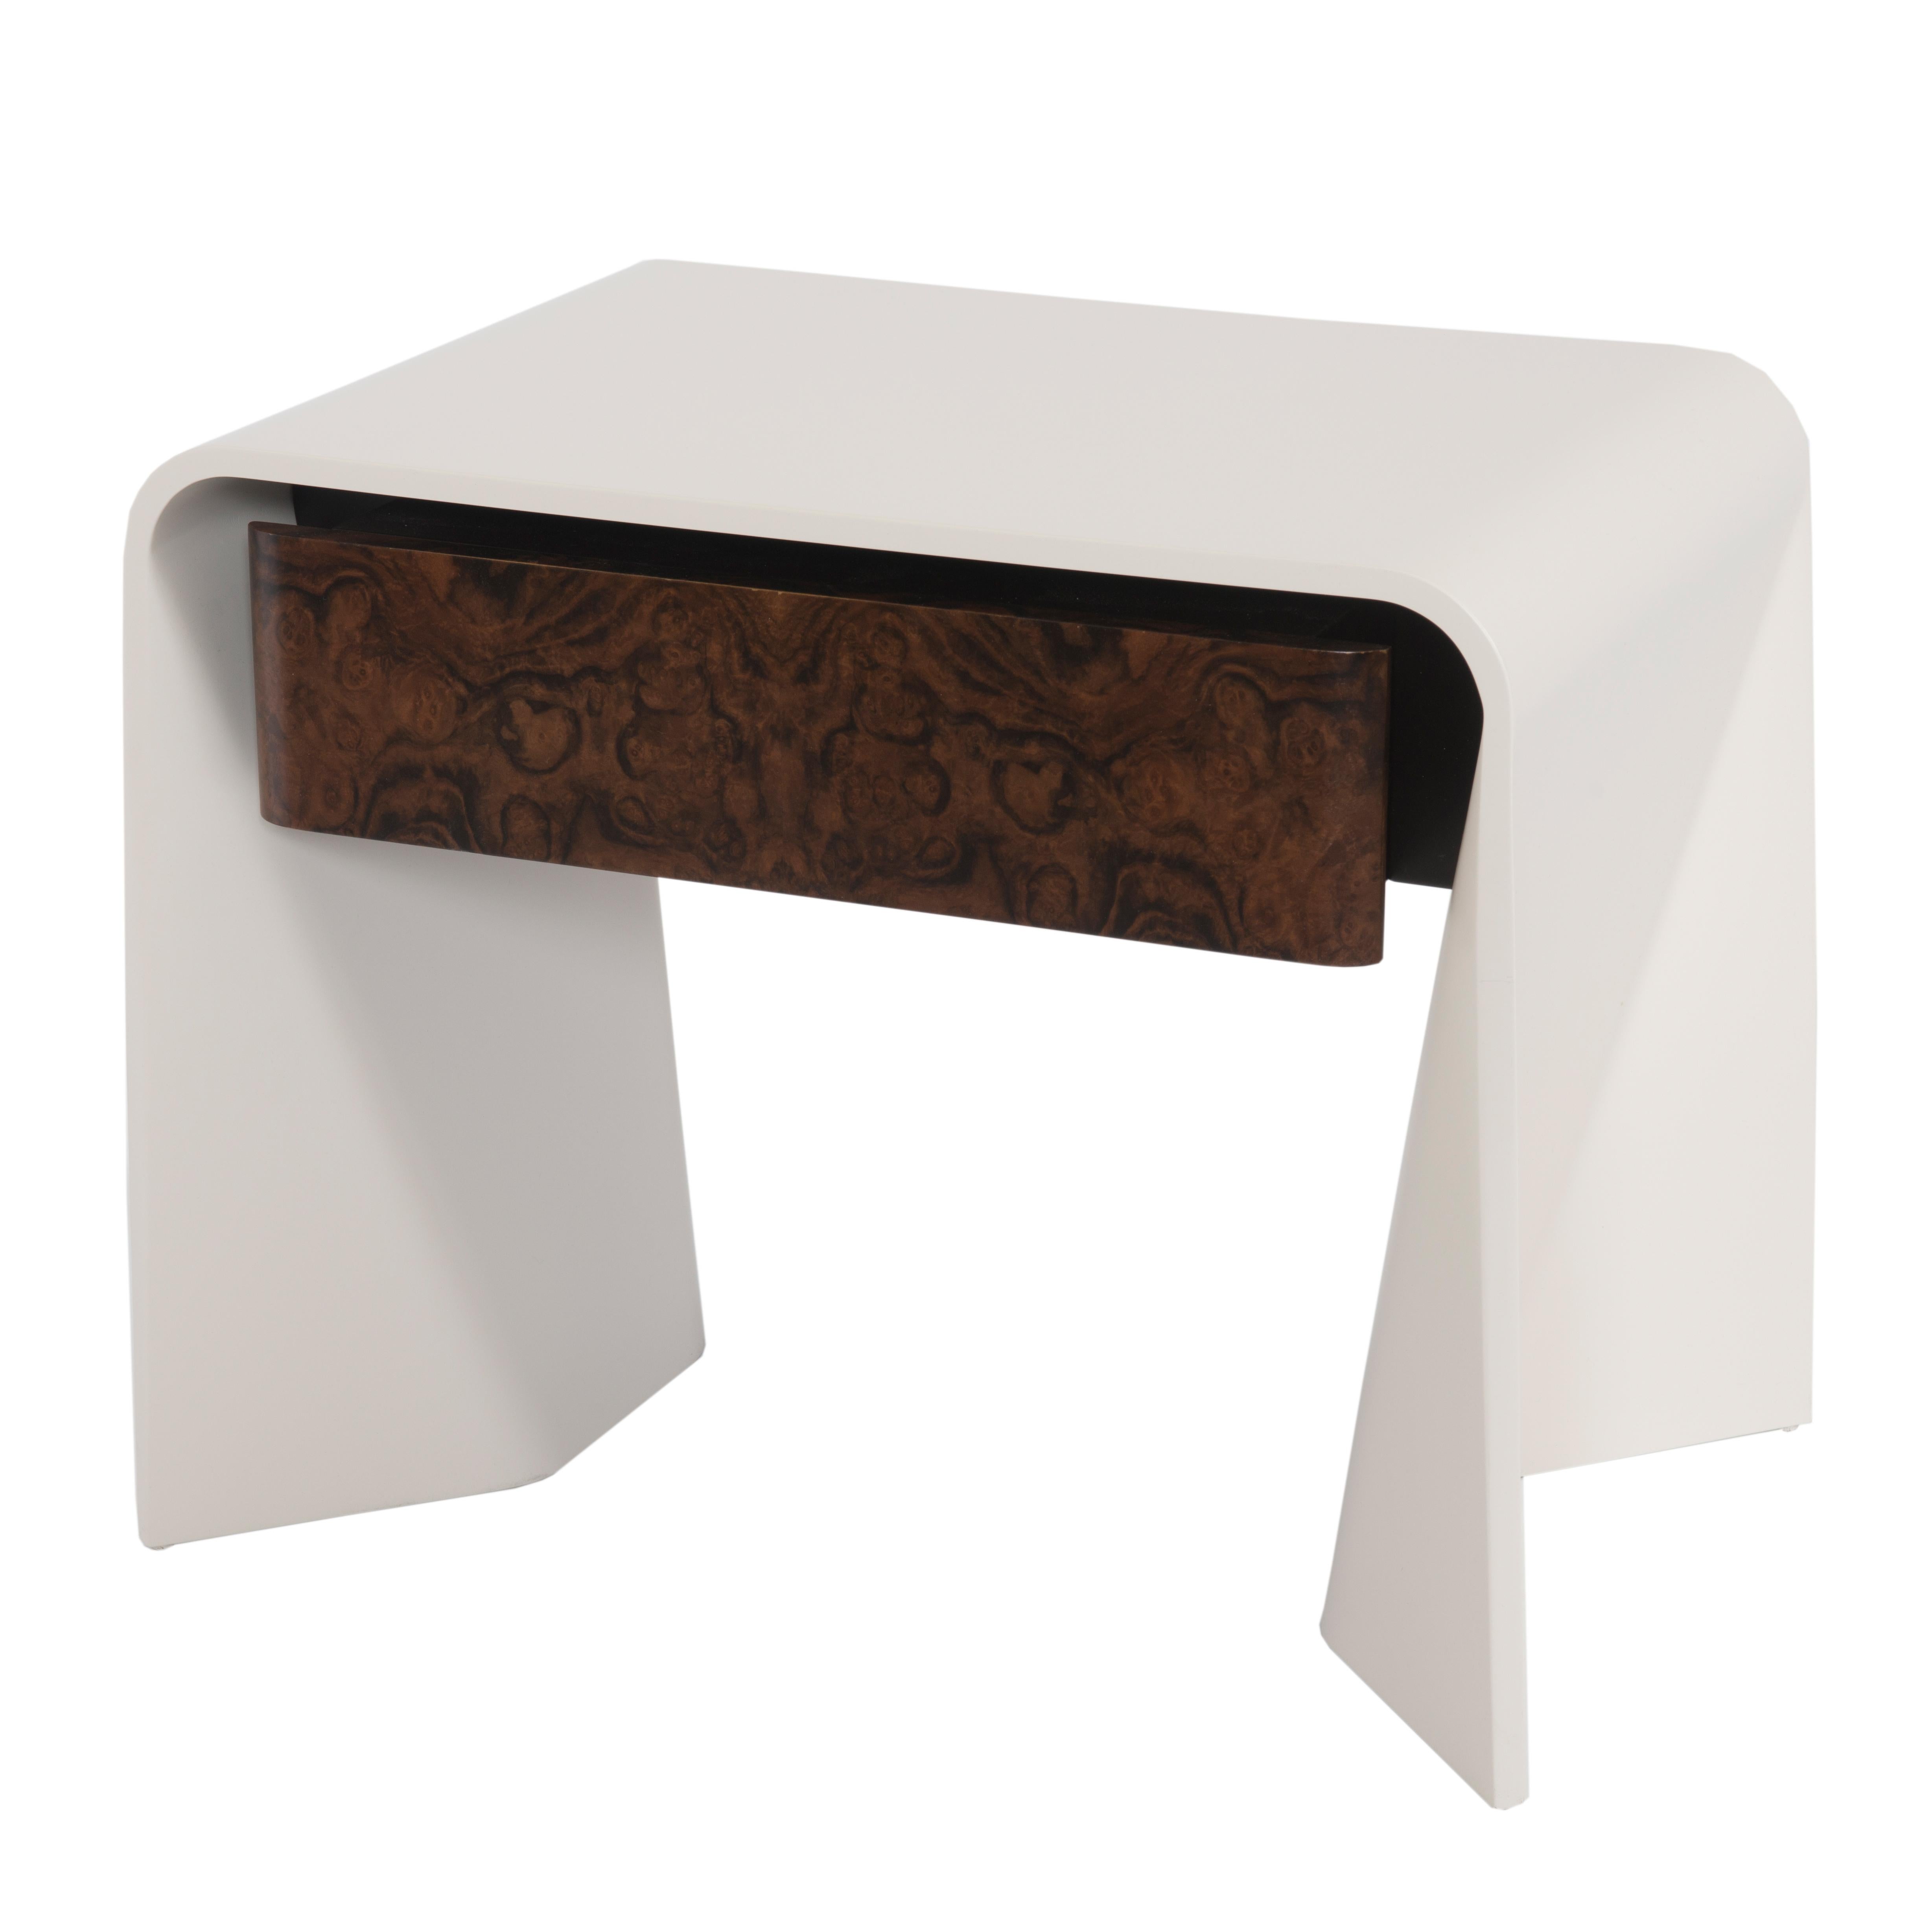 Rectangular bentwood end table featuring one drawer in a burled walnut veneer and a parchment color satin lacquer body. Made by bending thin pieces of wood, tendu is a ballet term meaning 